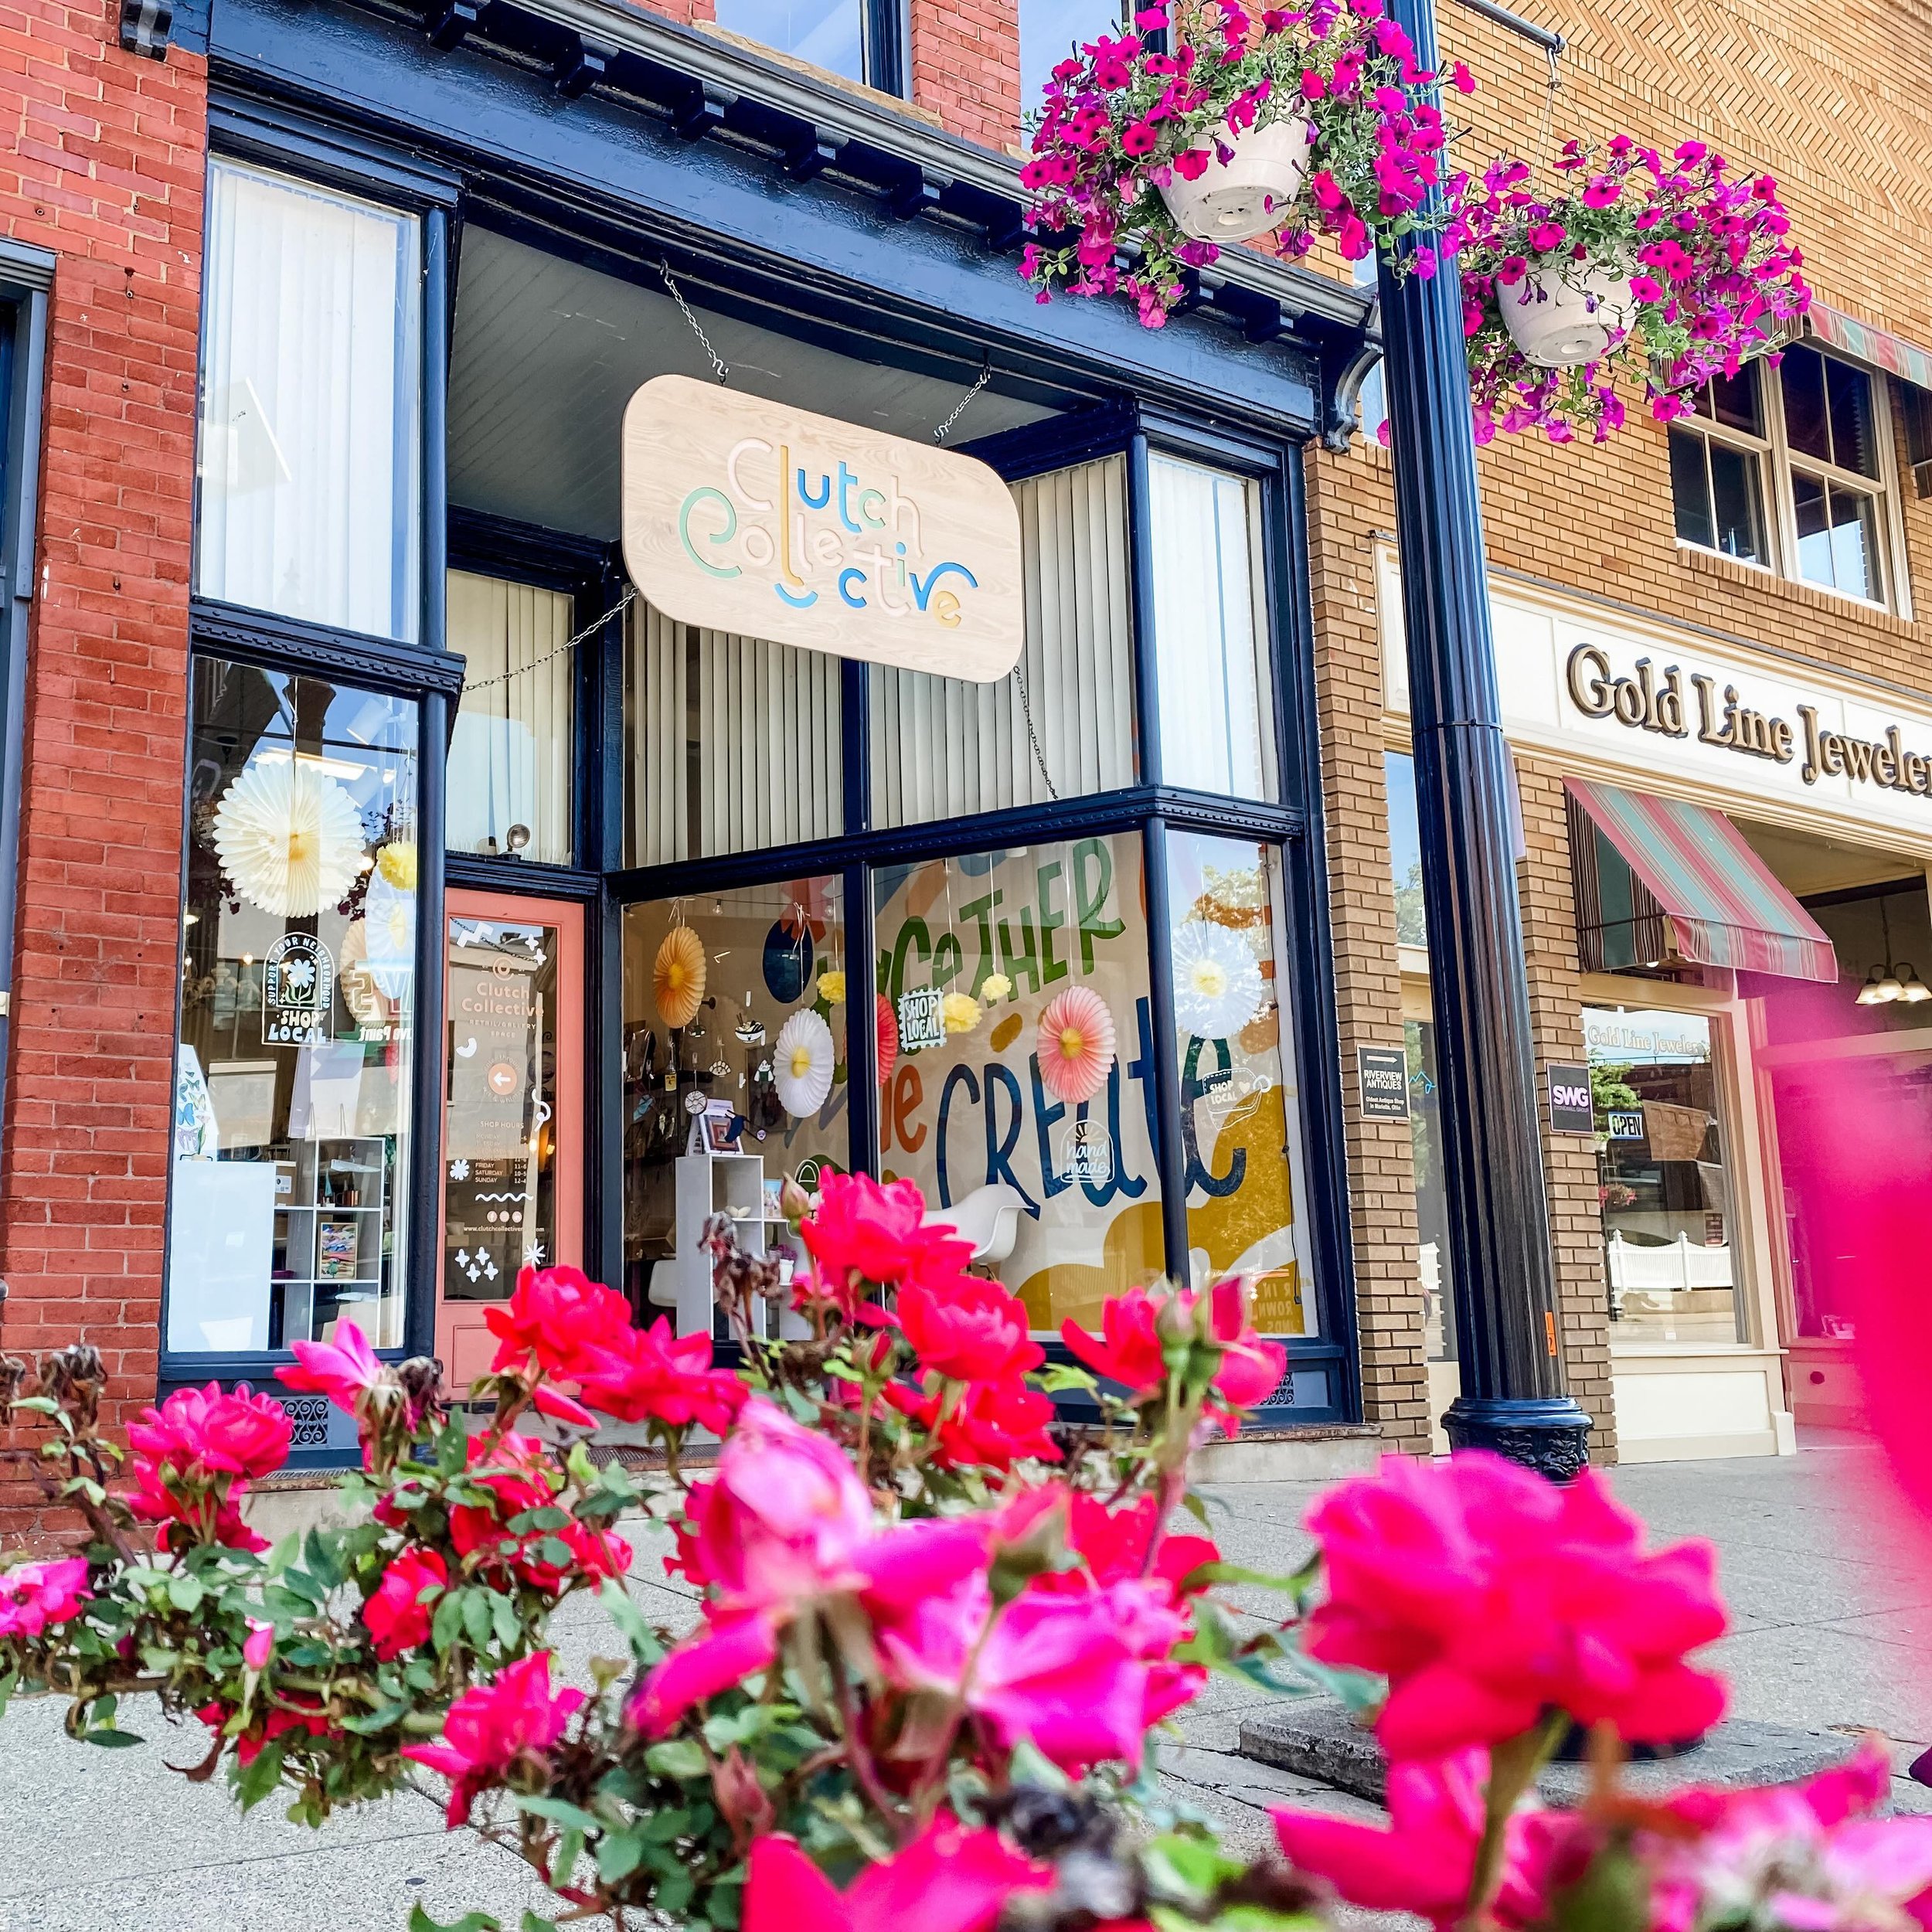 🌸 Happy Saturday! The sun is shining bright, the flowers are in bloom, and we are open until 6:00 pm today with a shop full of art prints, original art, greeting cards, handmade ceramics and jewelry, stickers and more, from over 60 local, regional, 